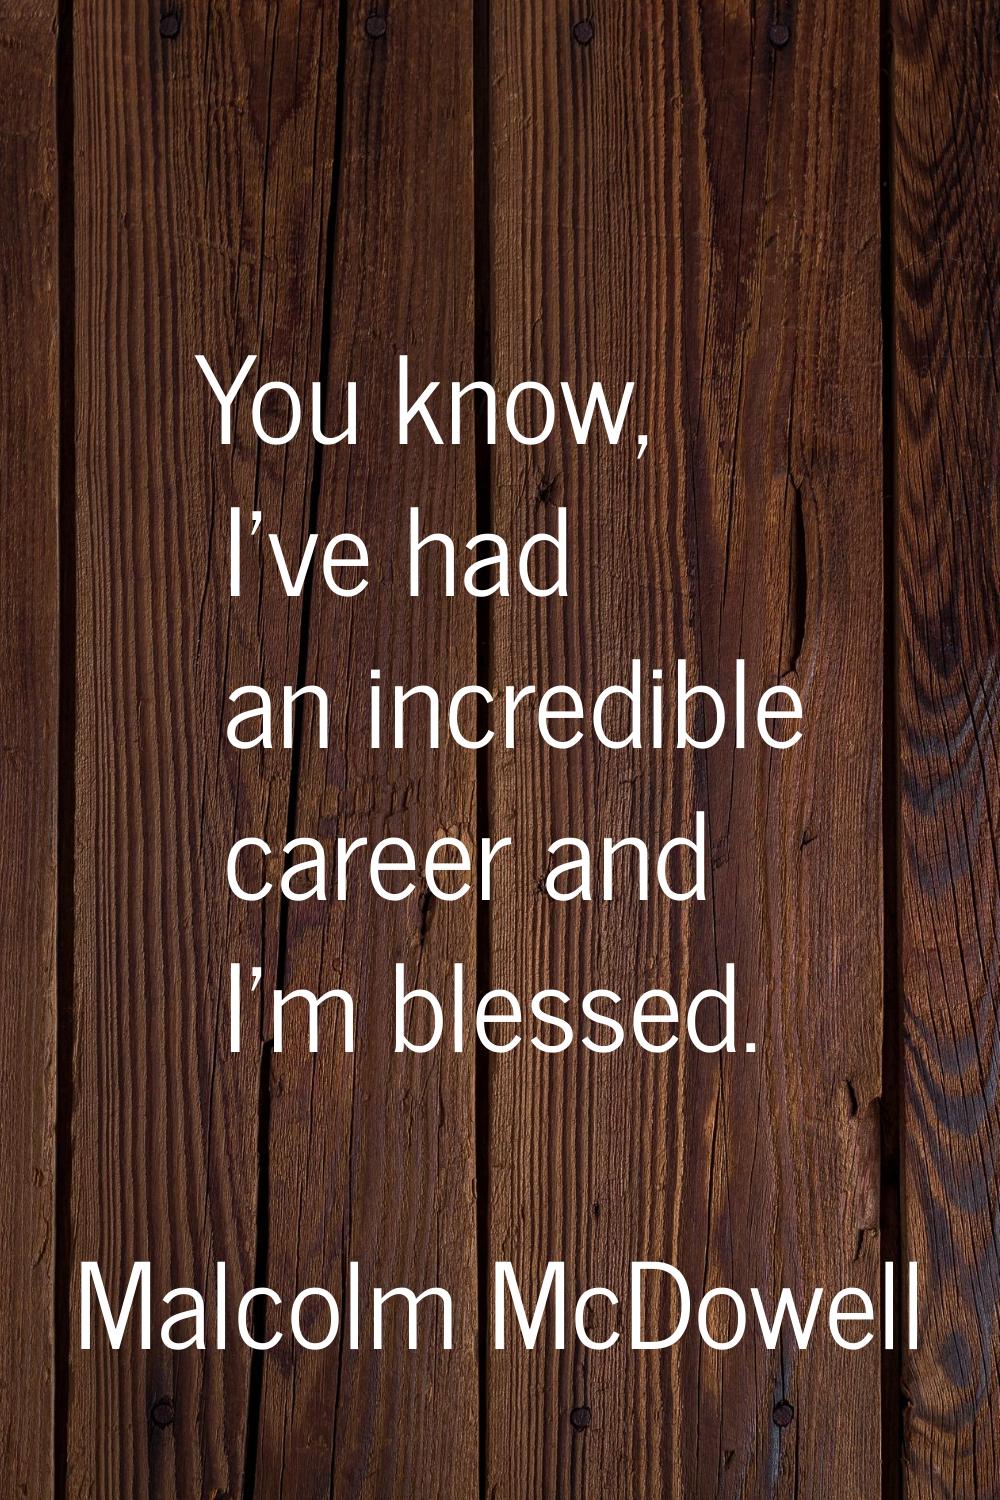 You know, I've had an incredible career and I'm blessed.